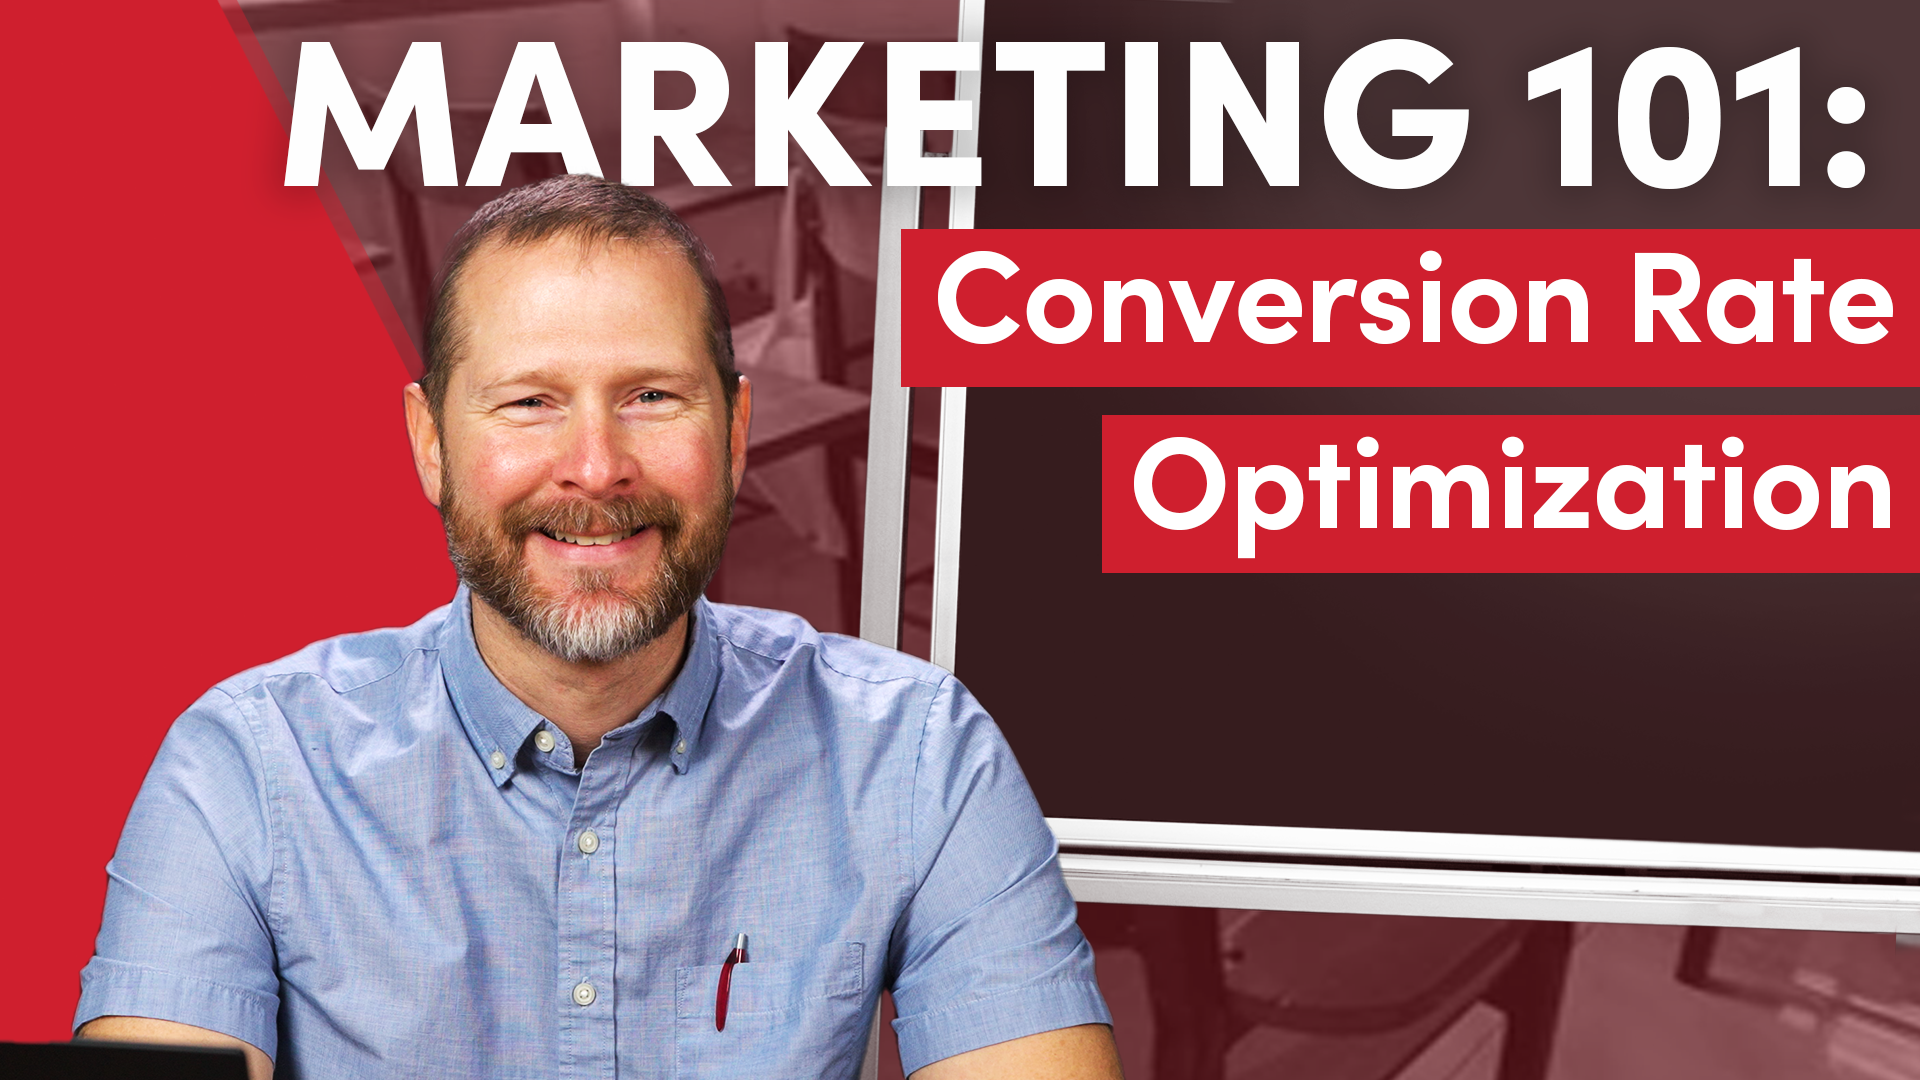 Learn how to do Conversion Rate Optimization